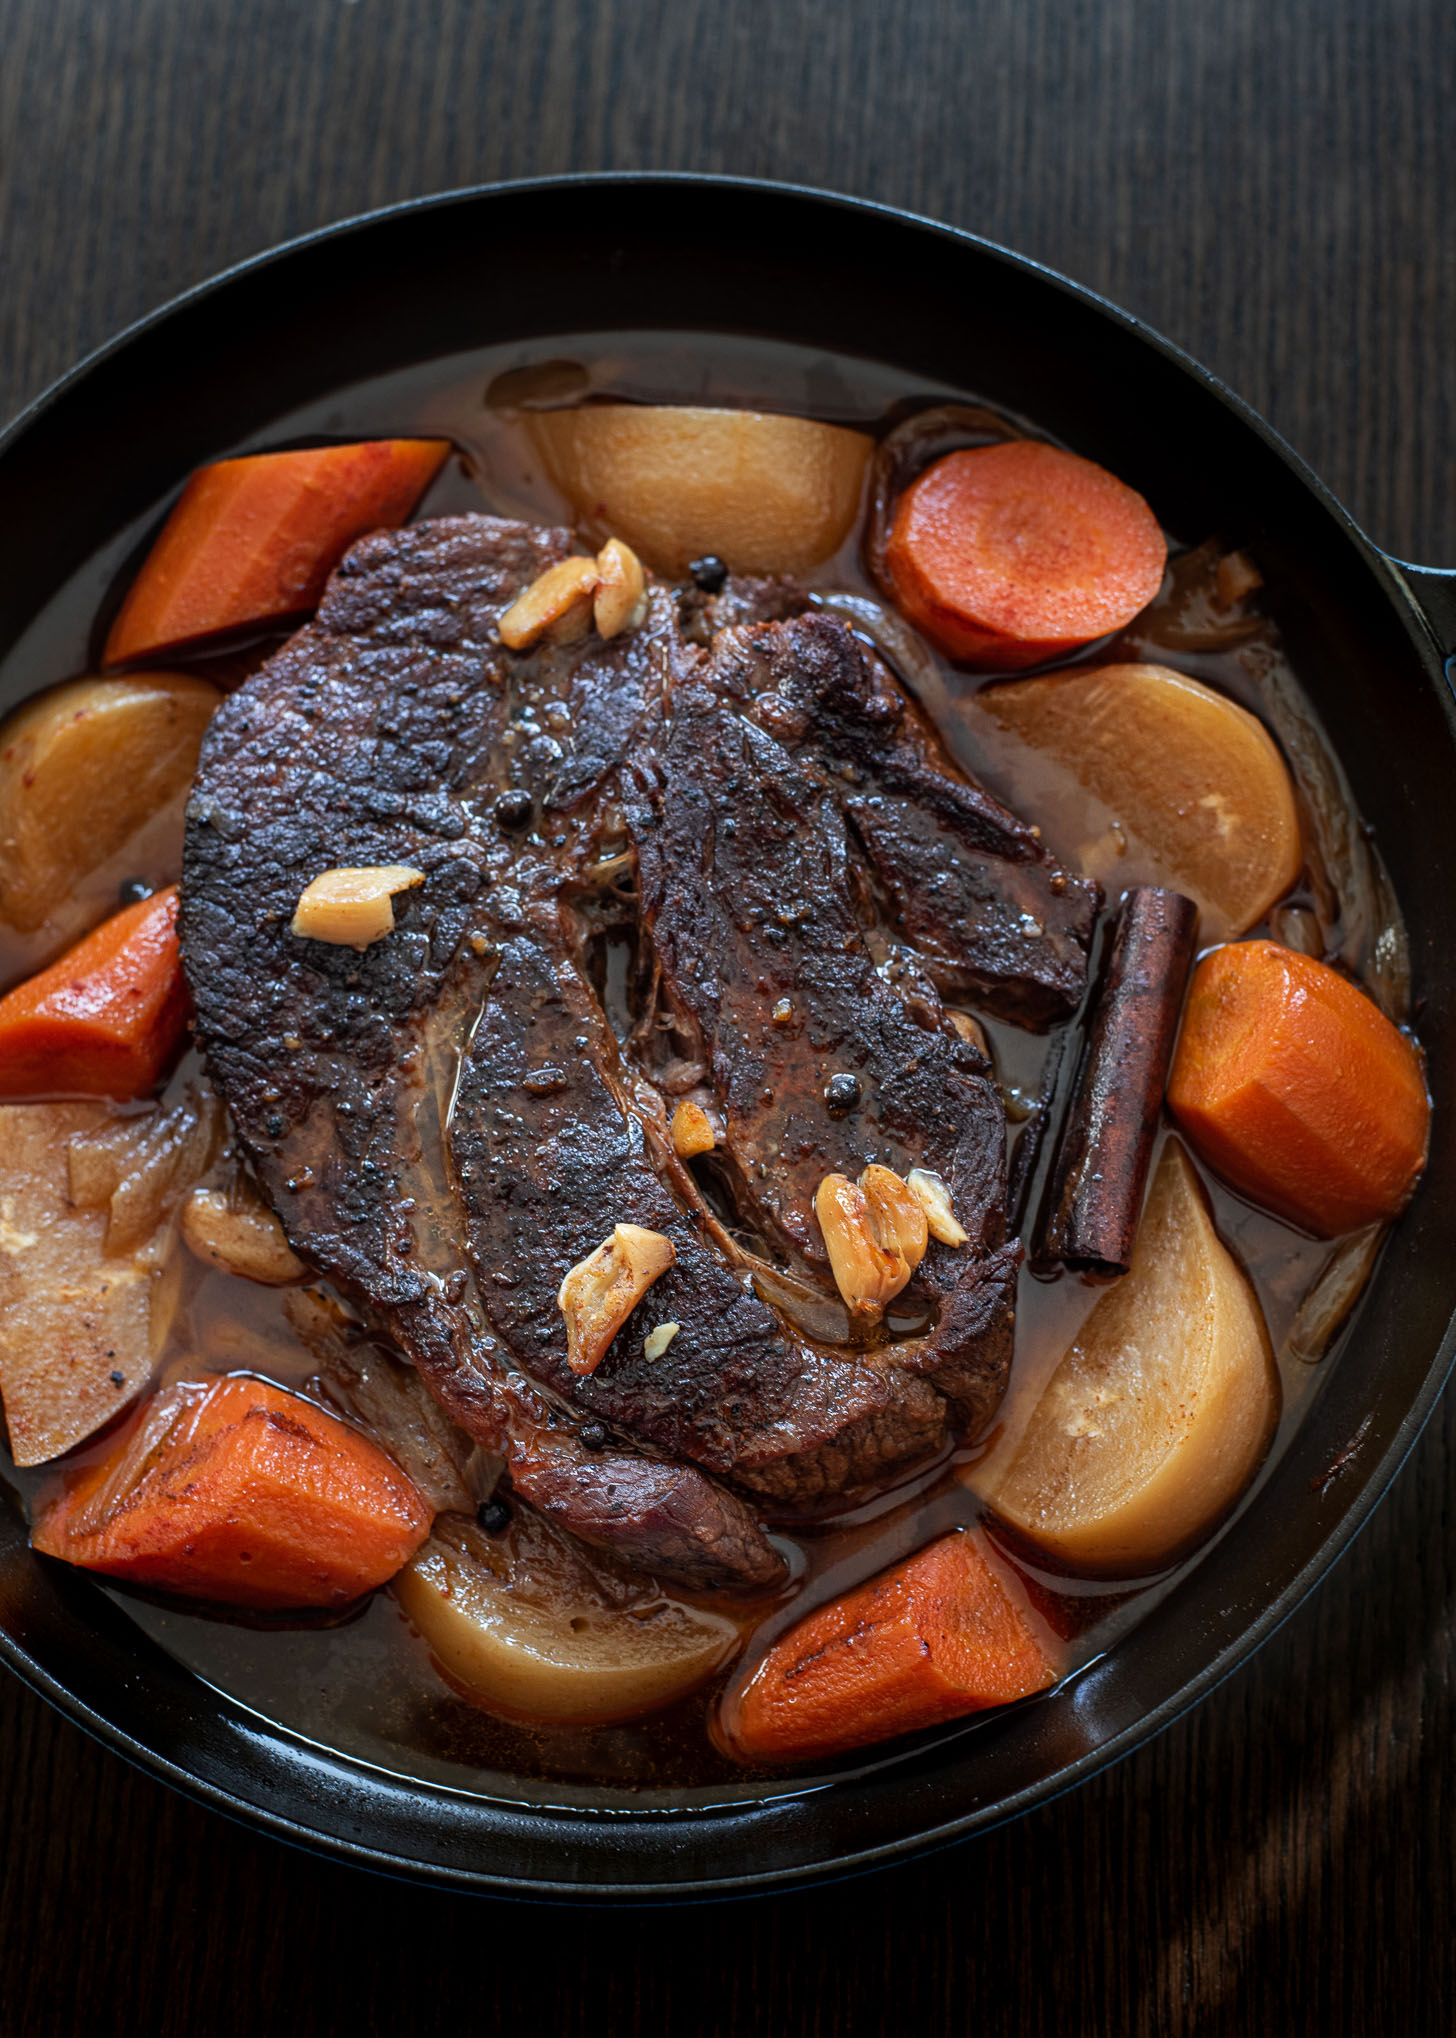 Beef chuck, carrot, onion, turnip are braised in a pan until soft.